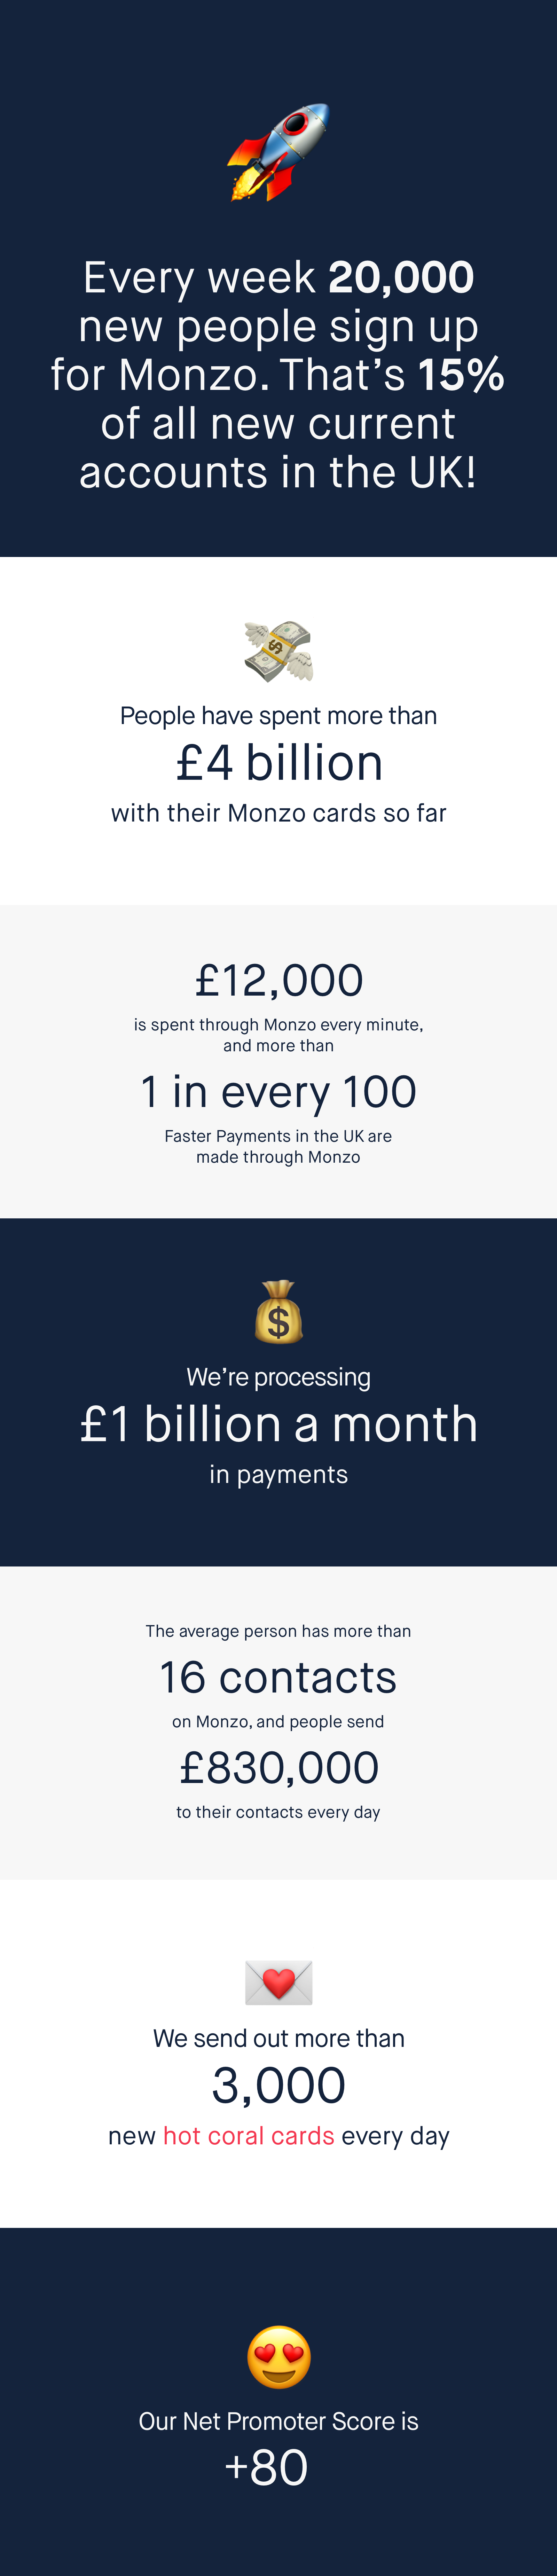 Infographics sharing stats about Monzo